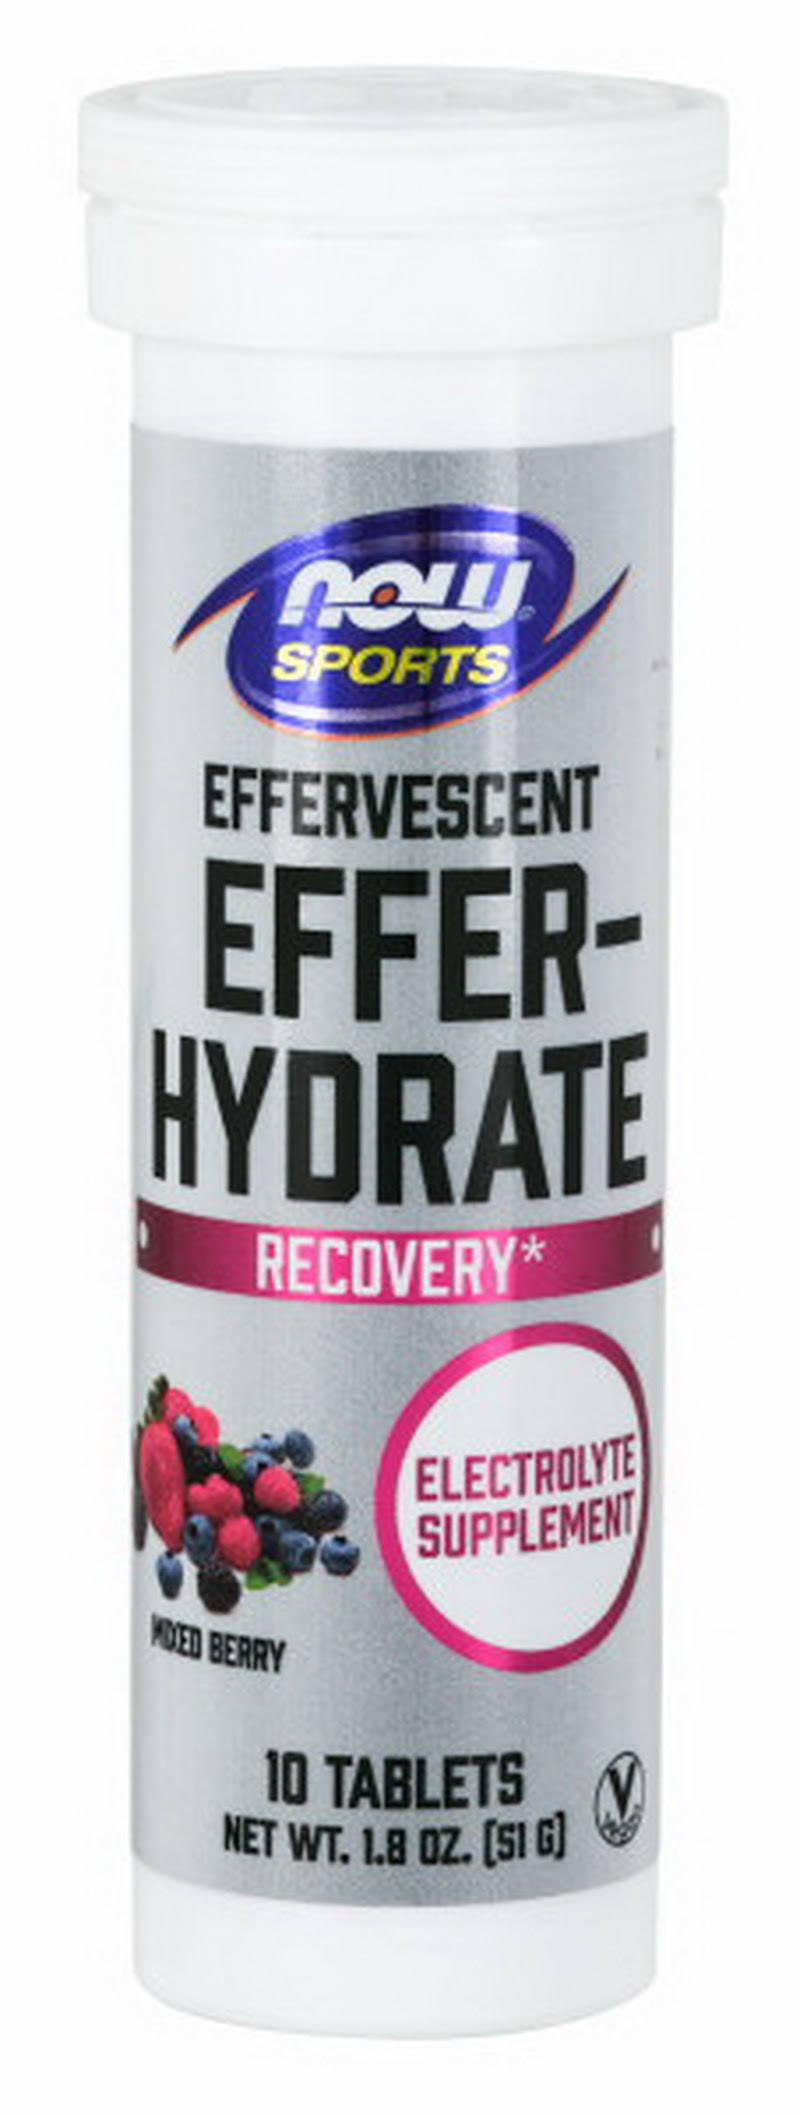 Now Foods Effer-Hydrate Effervescent - 10 Tablets Mixed Berry